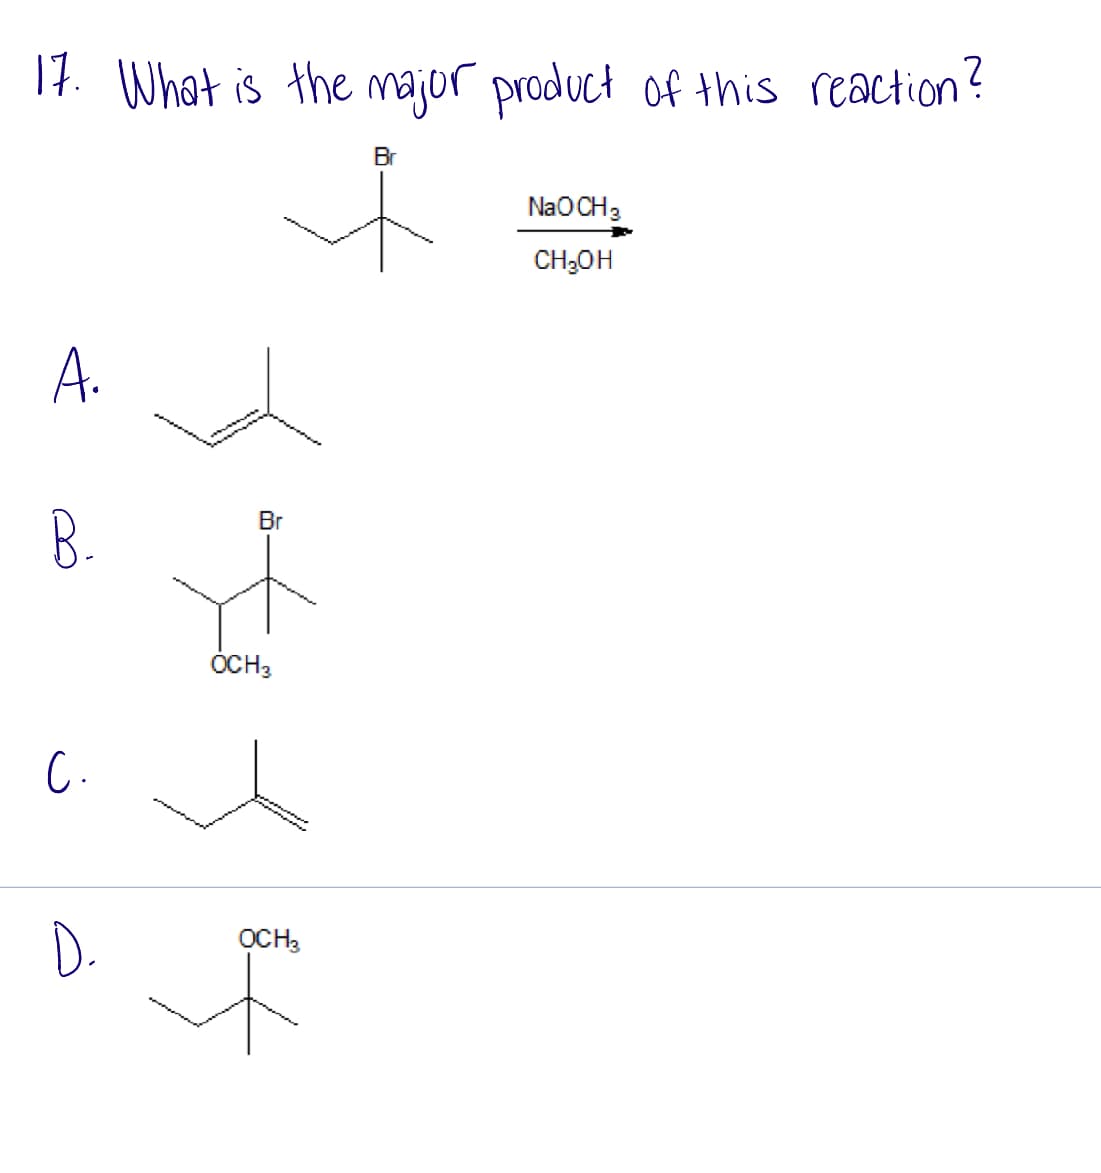 17. What is the major product of this reaction?
A.
B.
C.
D.
Br
OCH 3
OCH 3
Br
NaOCH 3
CH₂OH